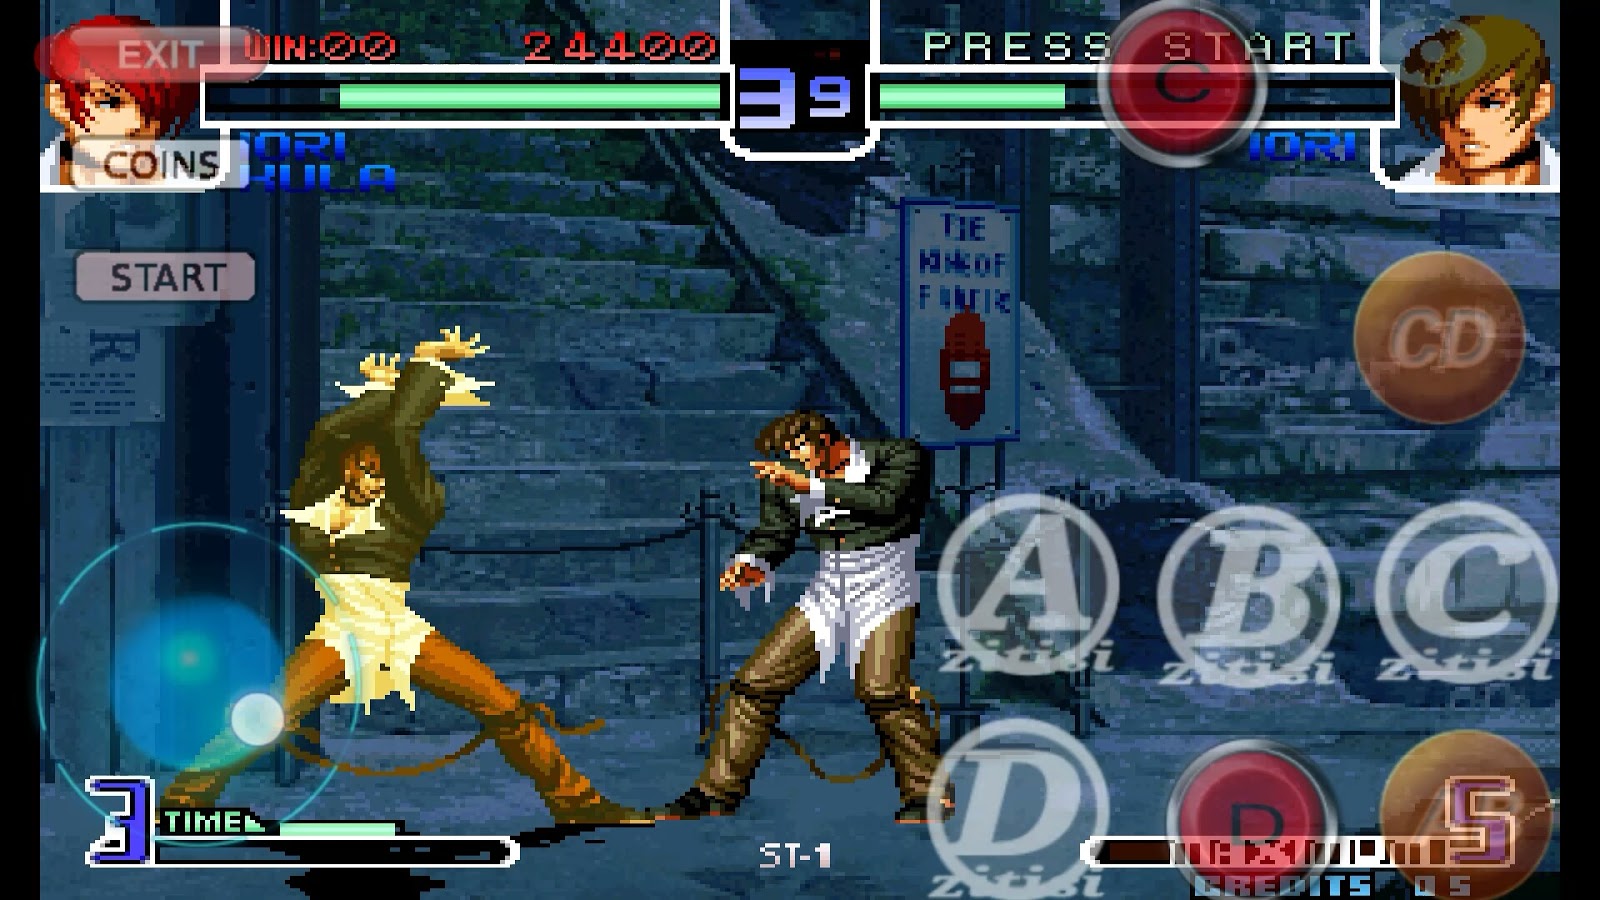 Download The King Of Fighters 2002 Magic Plus Mame